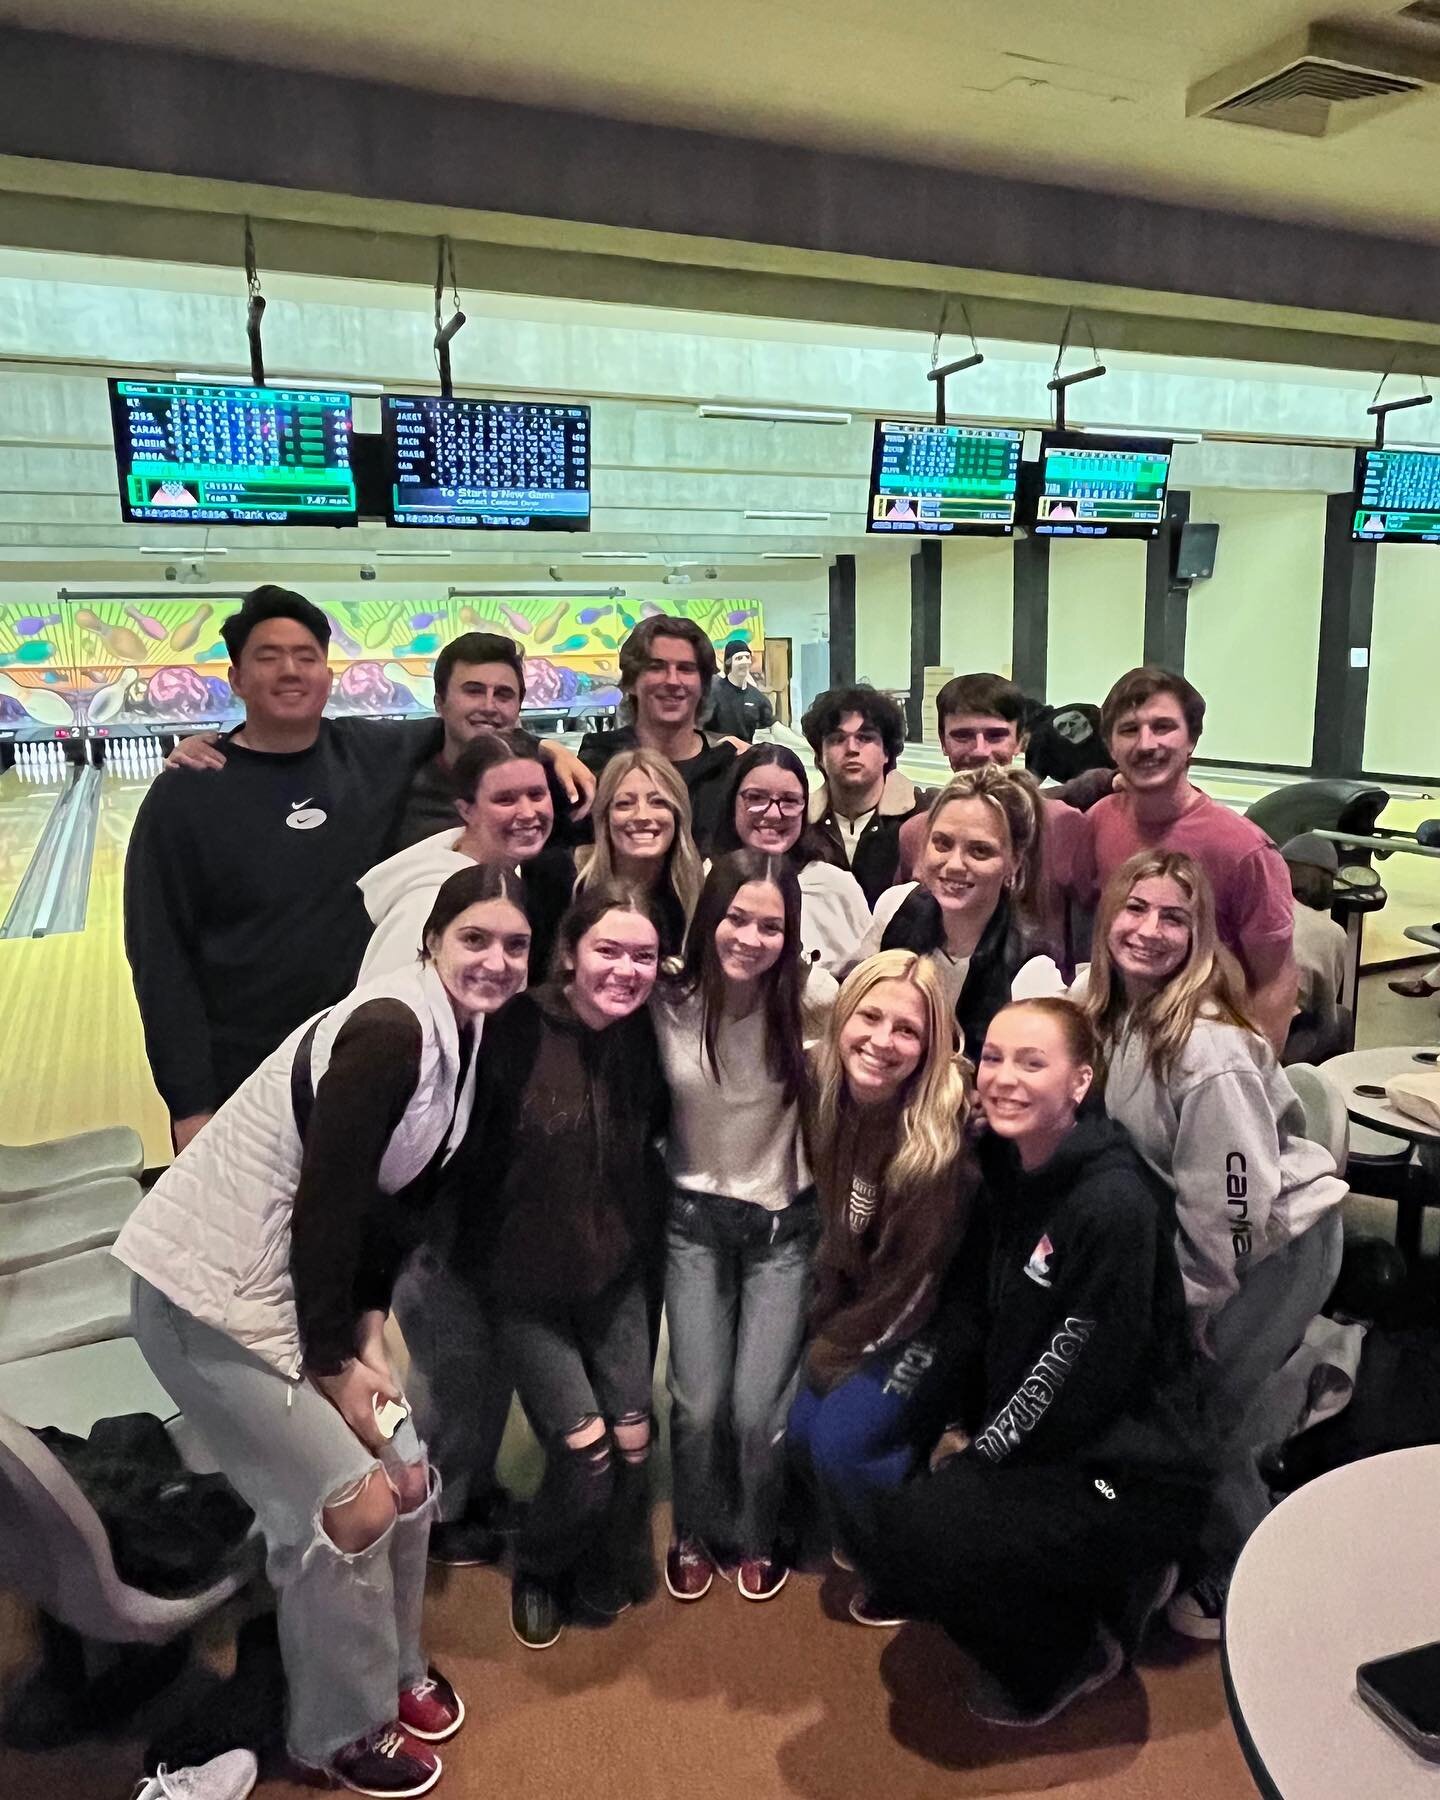 We had SO MUCH fun bowling last week! And we&rsquo;re so excited for our first meeting of this quarter at Active Church TONIGHT, at 8 pm!!! Bring a friend, come hang with us, we can&rsquo;t wait to see all of you there :) DM us if you need a ride!